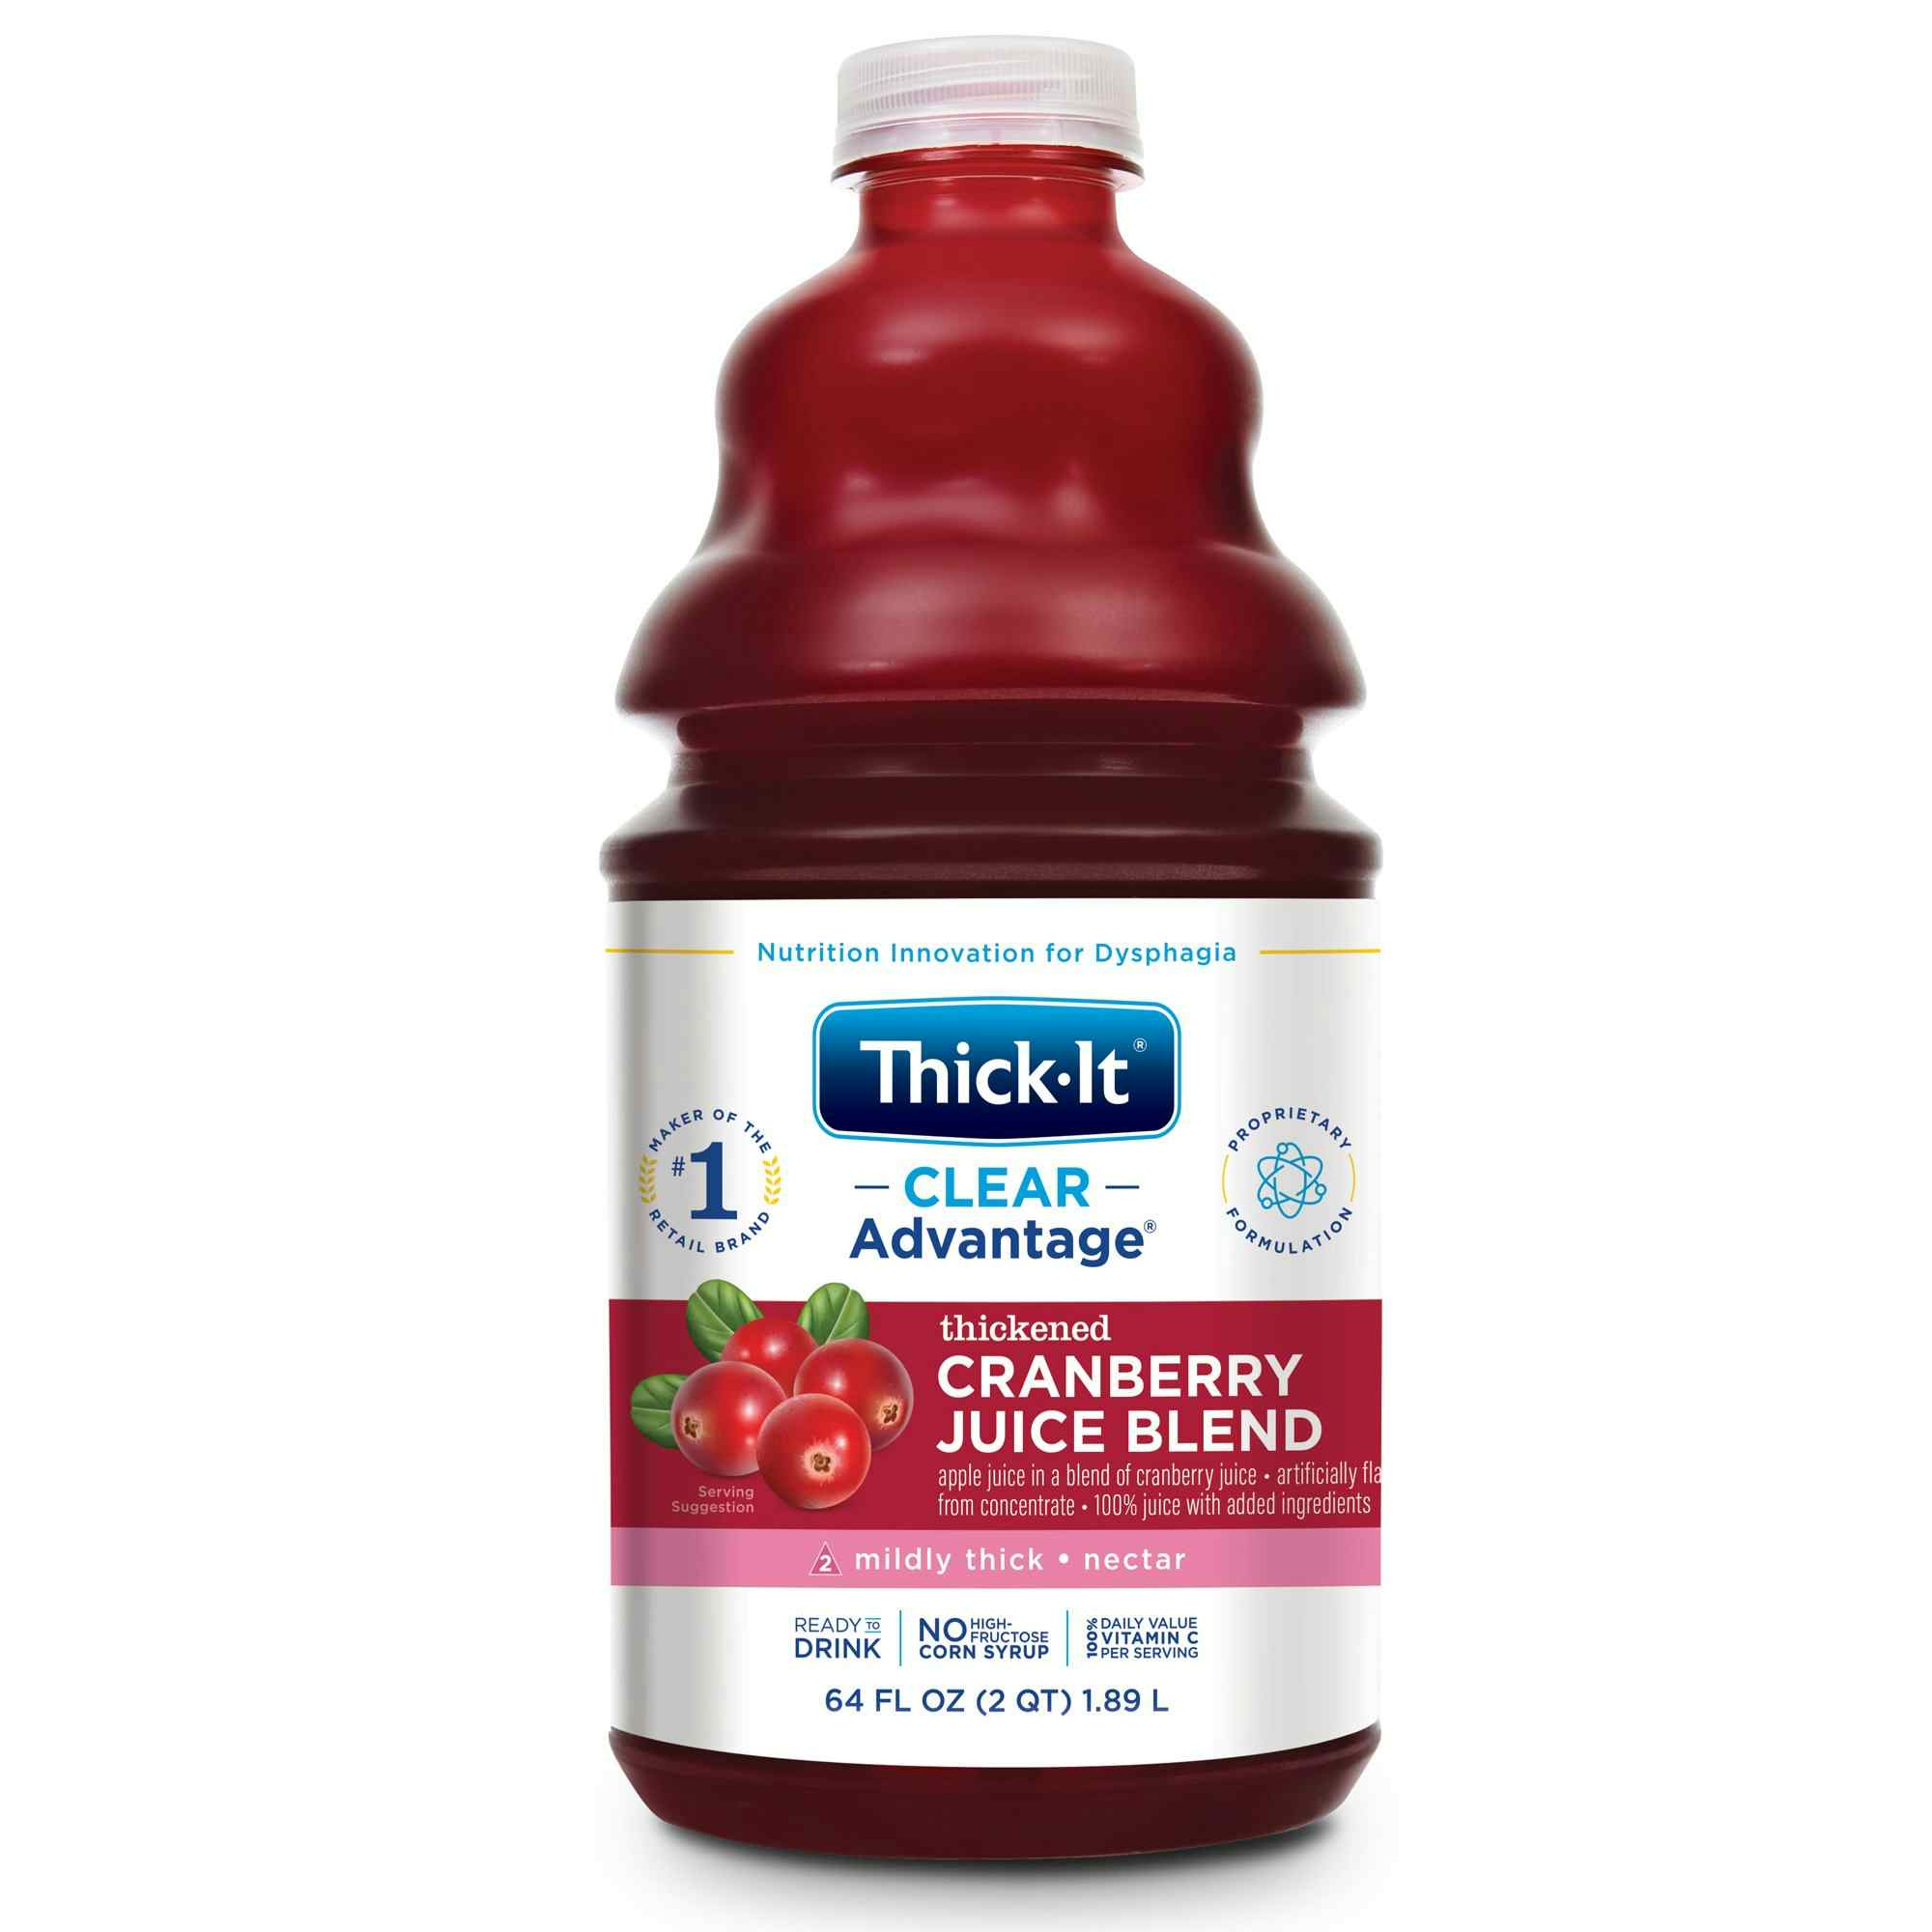 Thick-It Clear Advantage Thickened Cranberry Juice Blend, Mildly Thick, Nectar Consistency, B458-A5044, 64 oz. - Case of 4